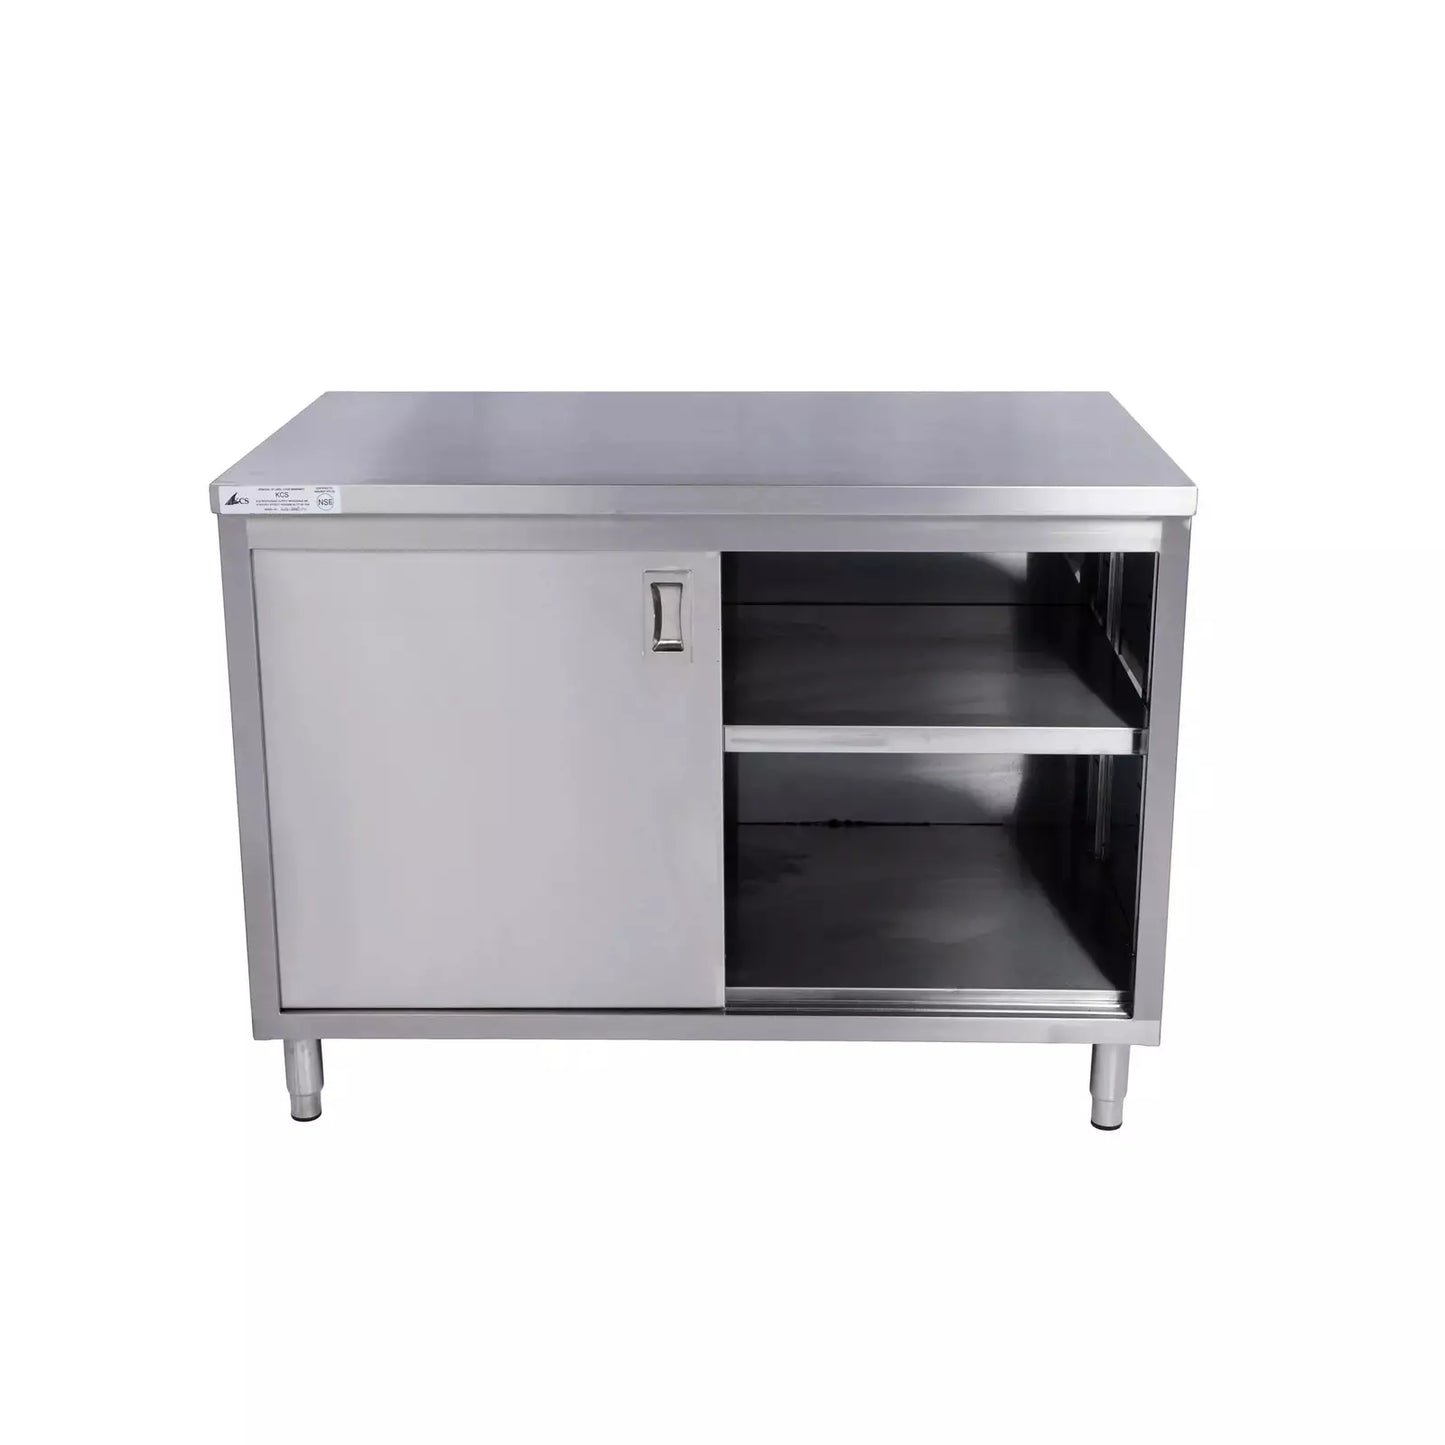 KCS CBS-3060 30" x 60" Stainless Steel Storage Welded Cabinet with 2 Sliding Doors